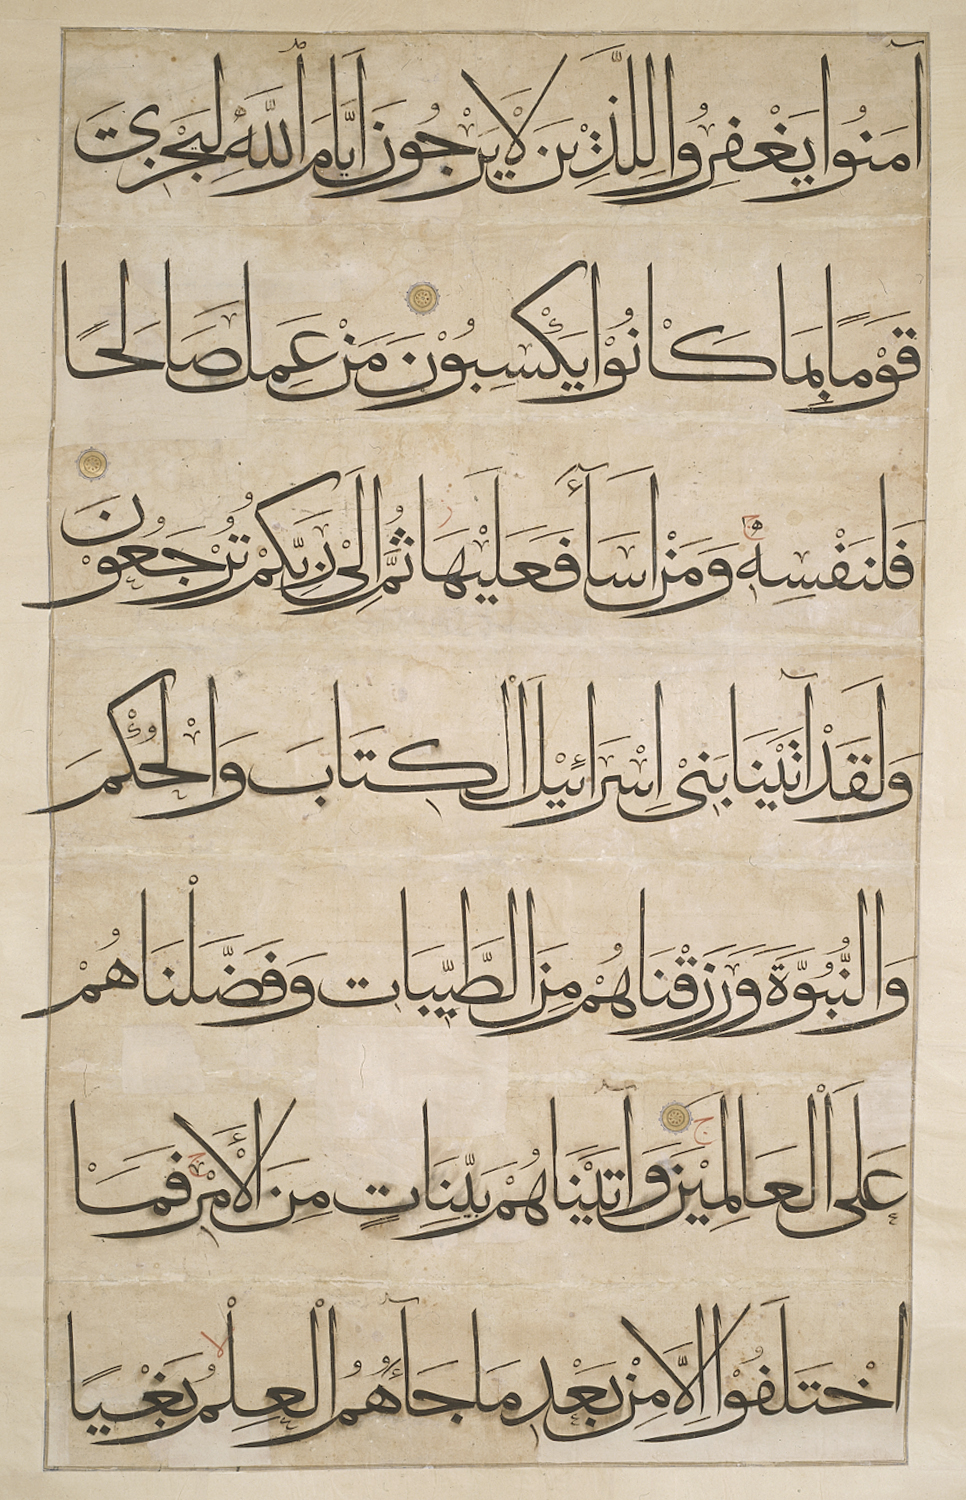 Image of Koran, with lines of text